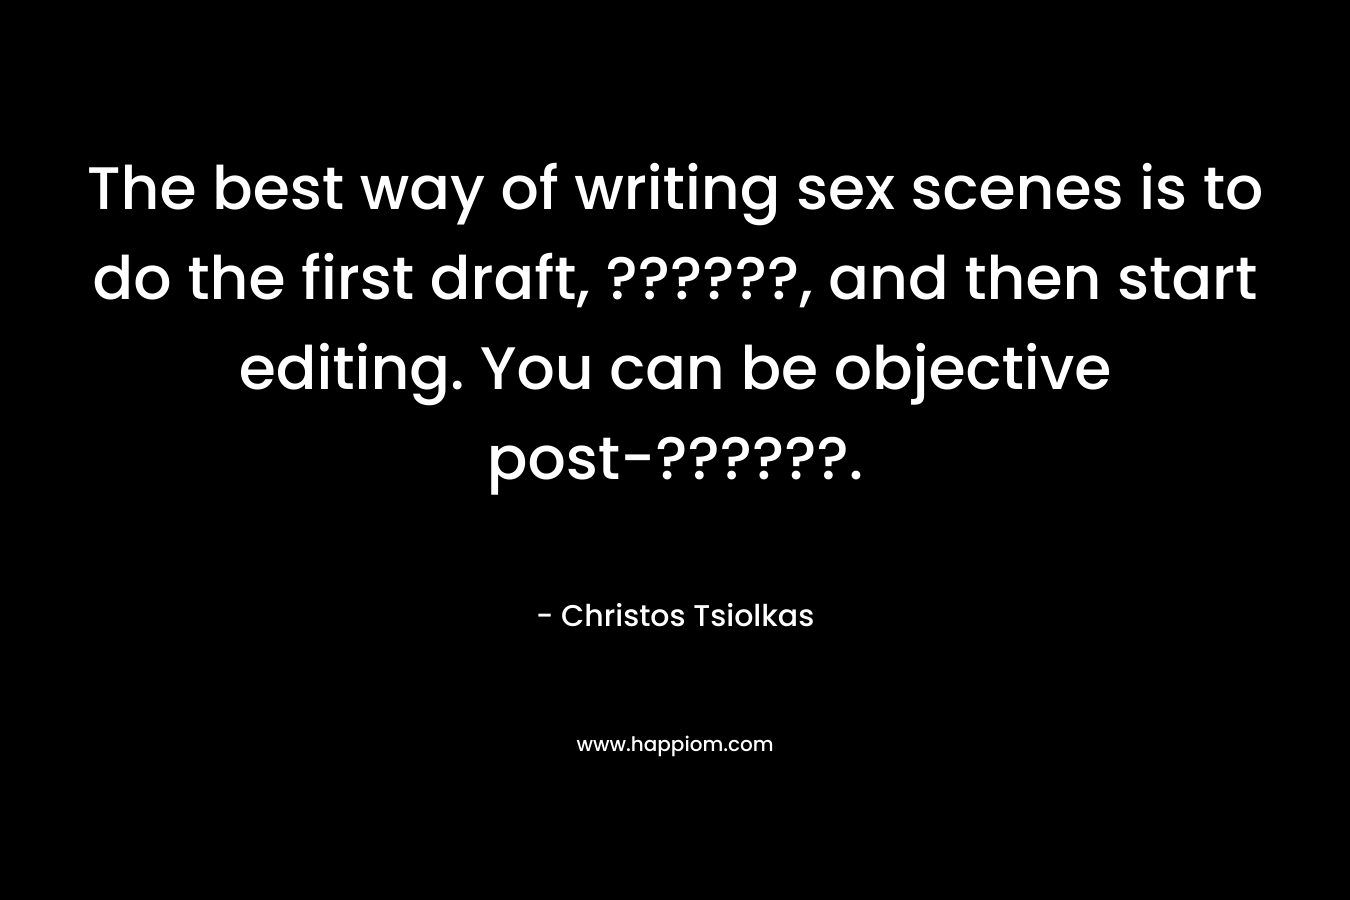 The best way of writing sex scenes is to do the first draft, ??????, and then start editing. You can be objective post-??????. – Christos Tsiolkas